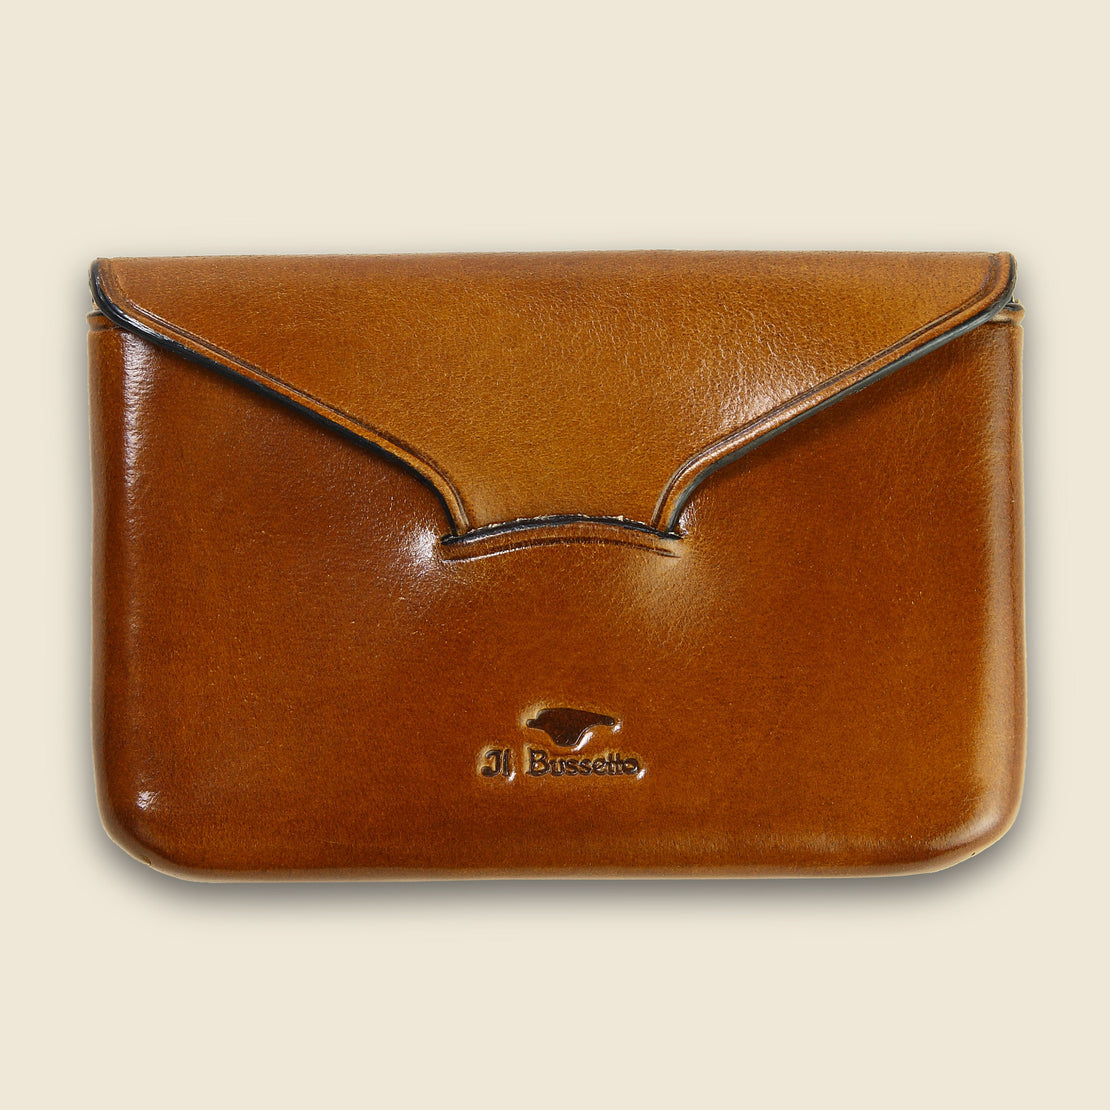 Il Bussetto Business Card Holder - Light Brown